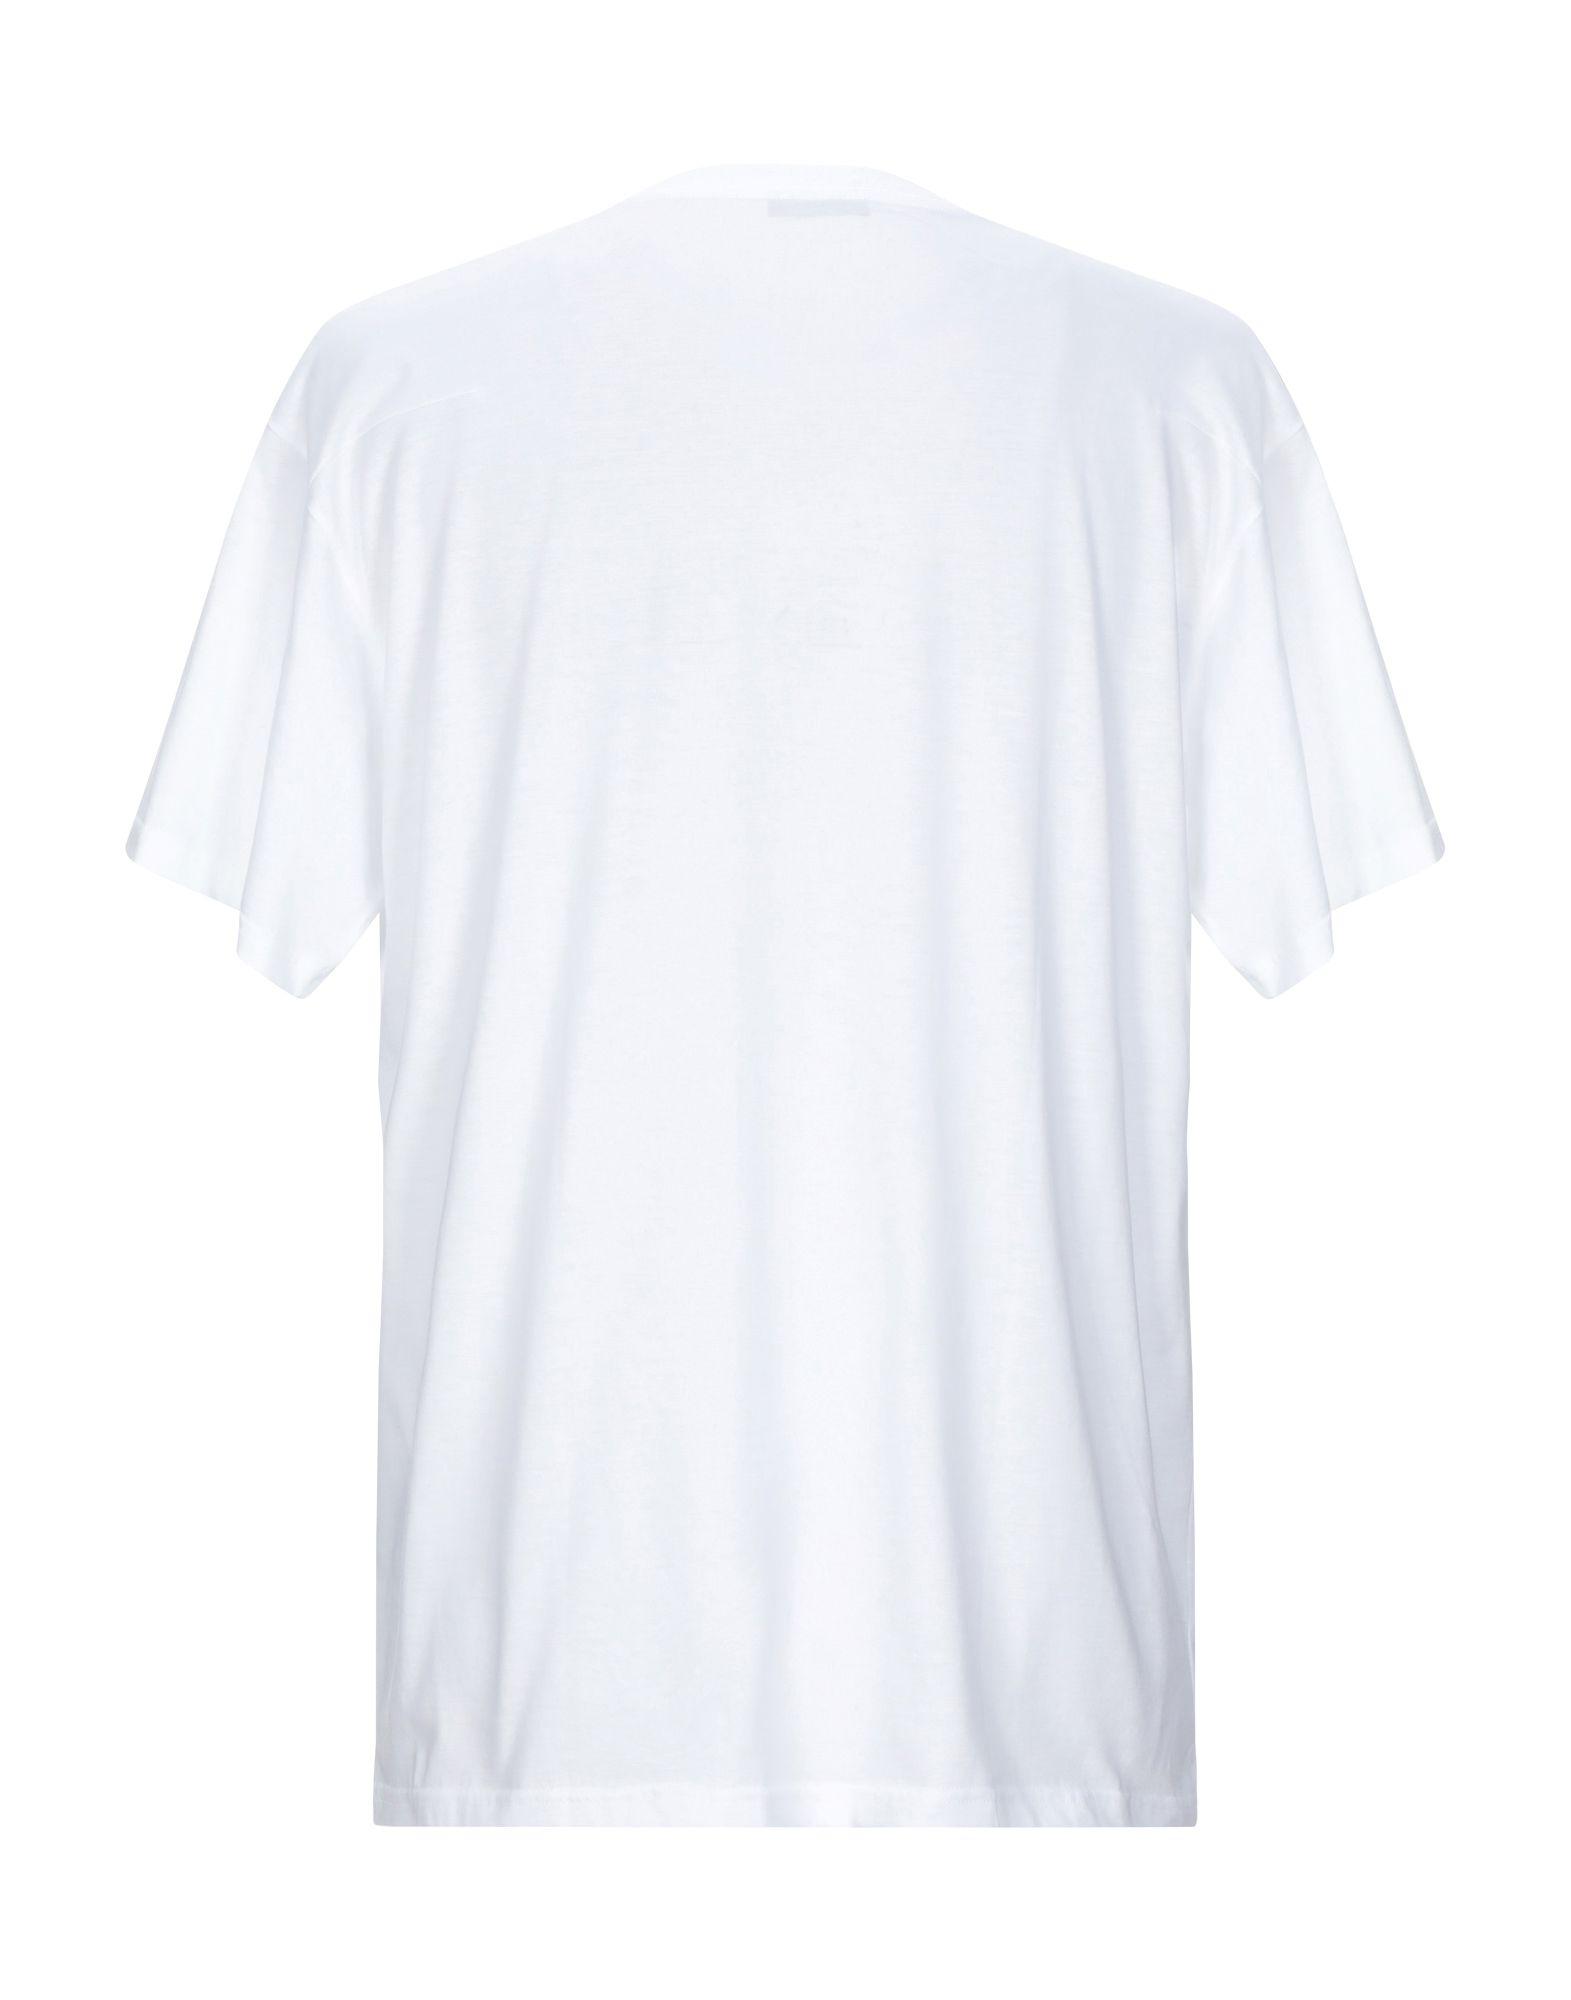 Dior Homme Cotton T-shirt in White for Men - Lyst